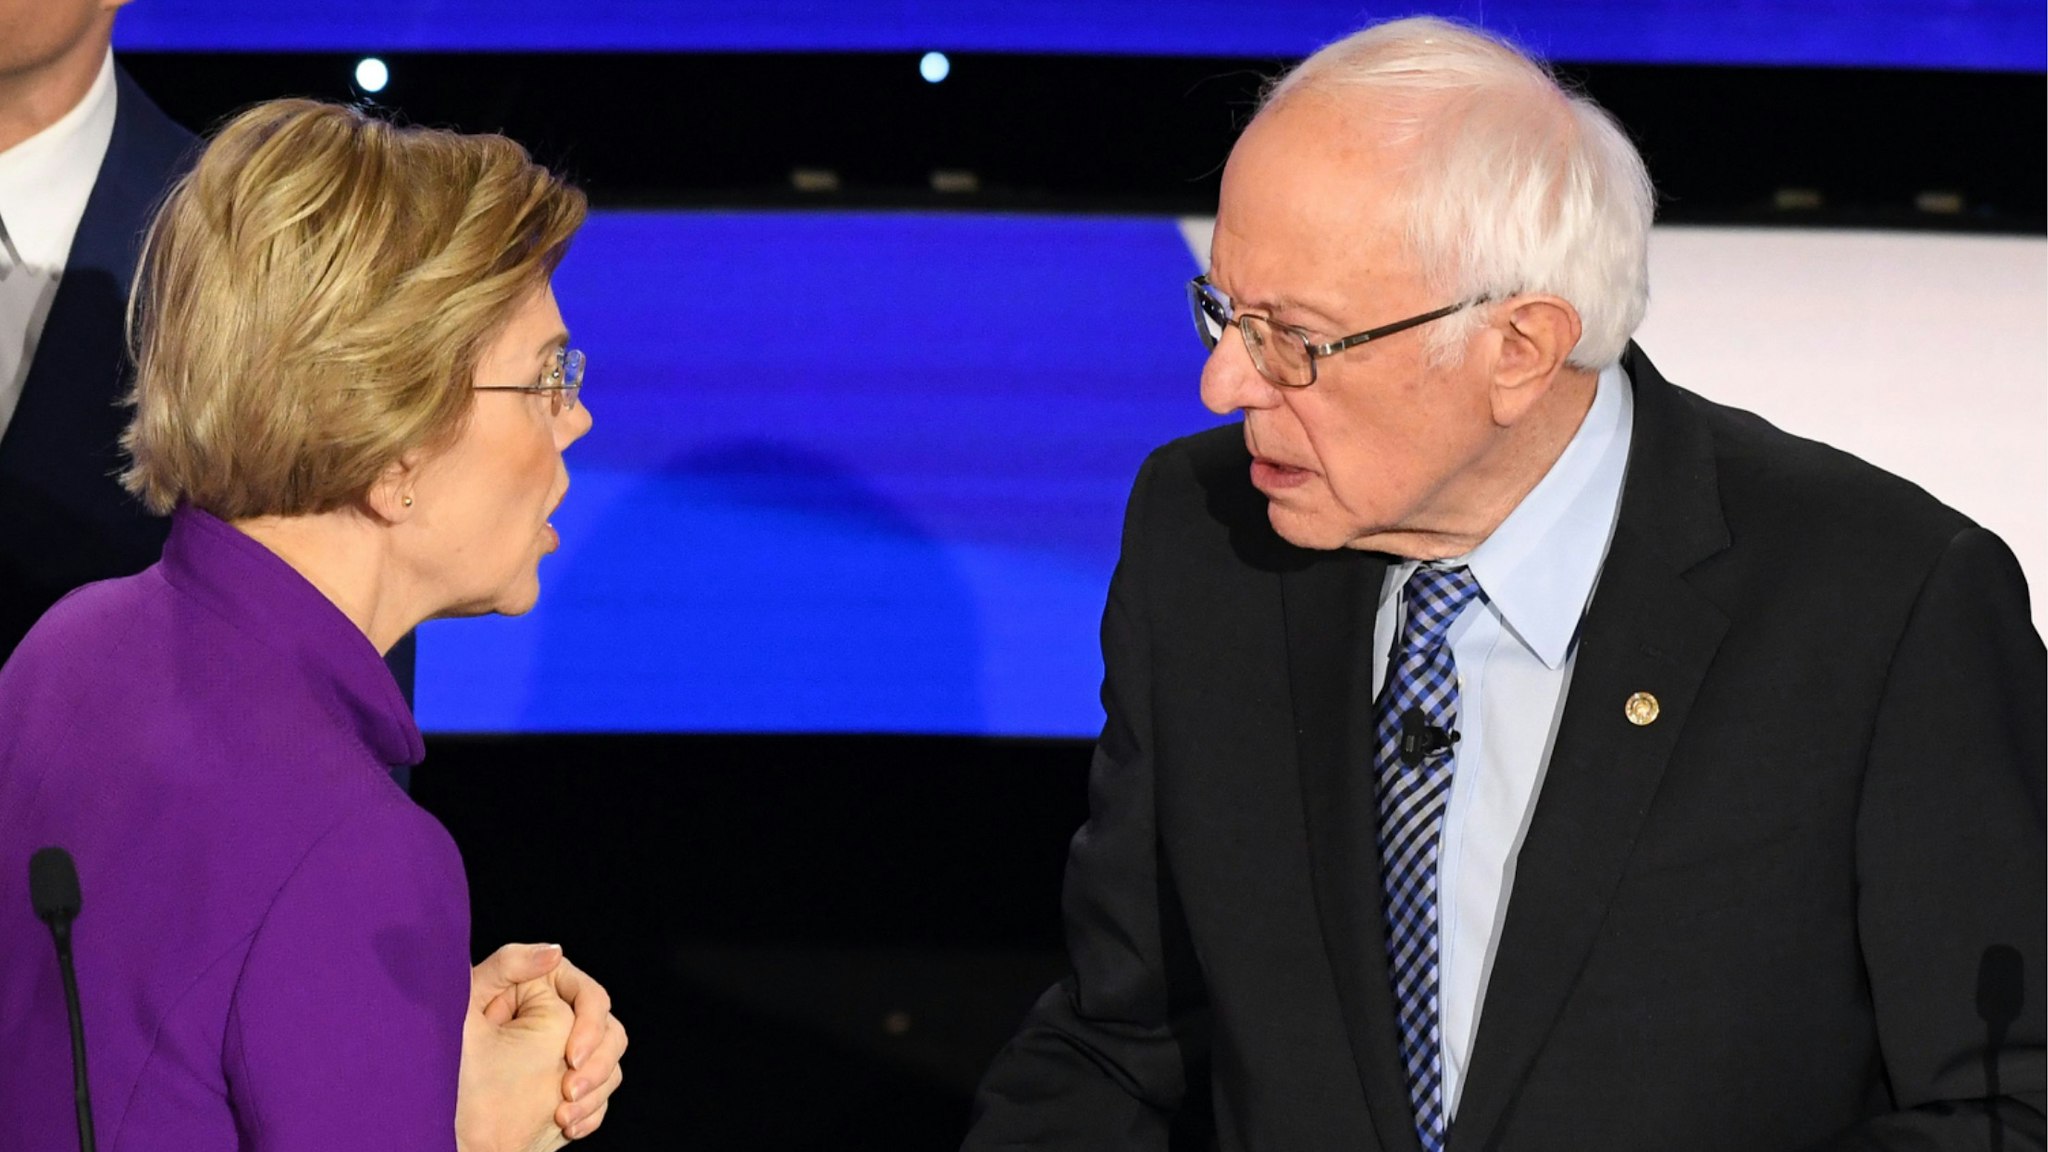 Democratic presidential hopeful Massachusetts Senator Elizabeth Warren and Vermont Senator Bernie Sanders speak after the seventh Democratic primary debate of the 2020 presidential campaign season co-hosted by CNN and the Des Moines Register at the Drake University campus in Des Moines, Iowa on January 14, 2020.